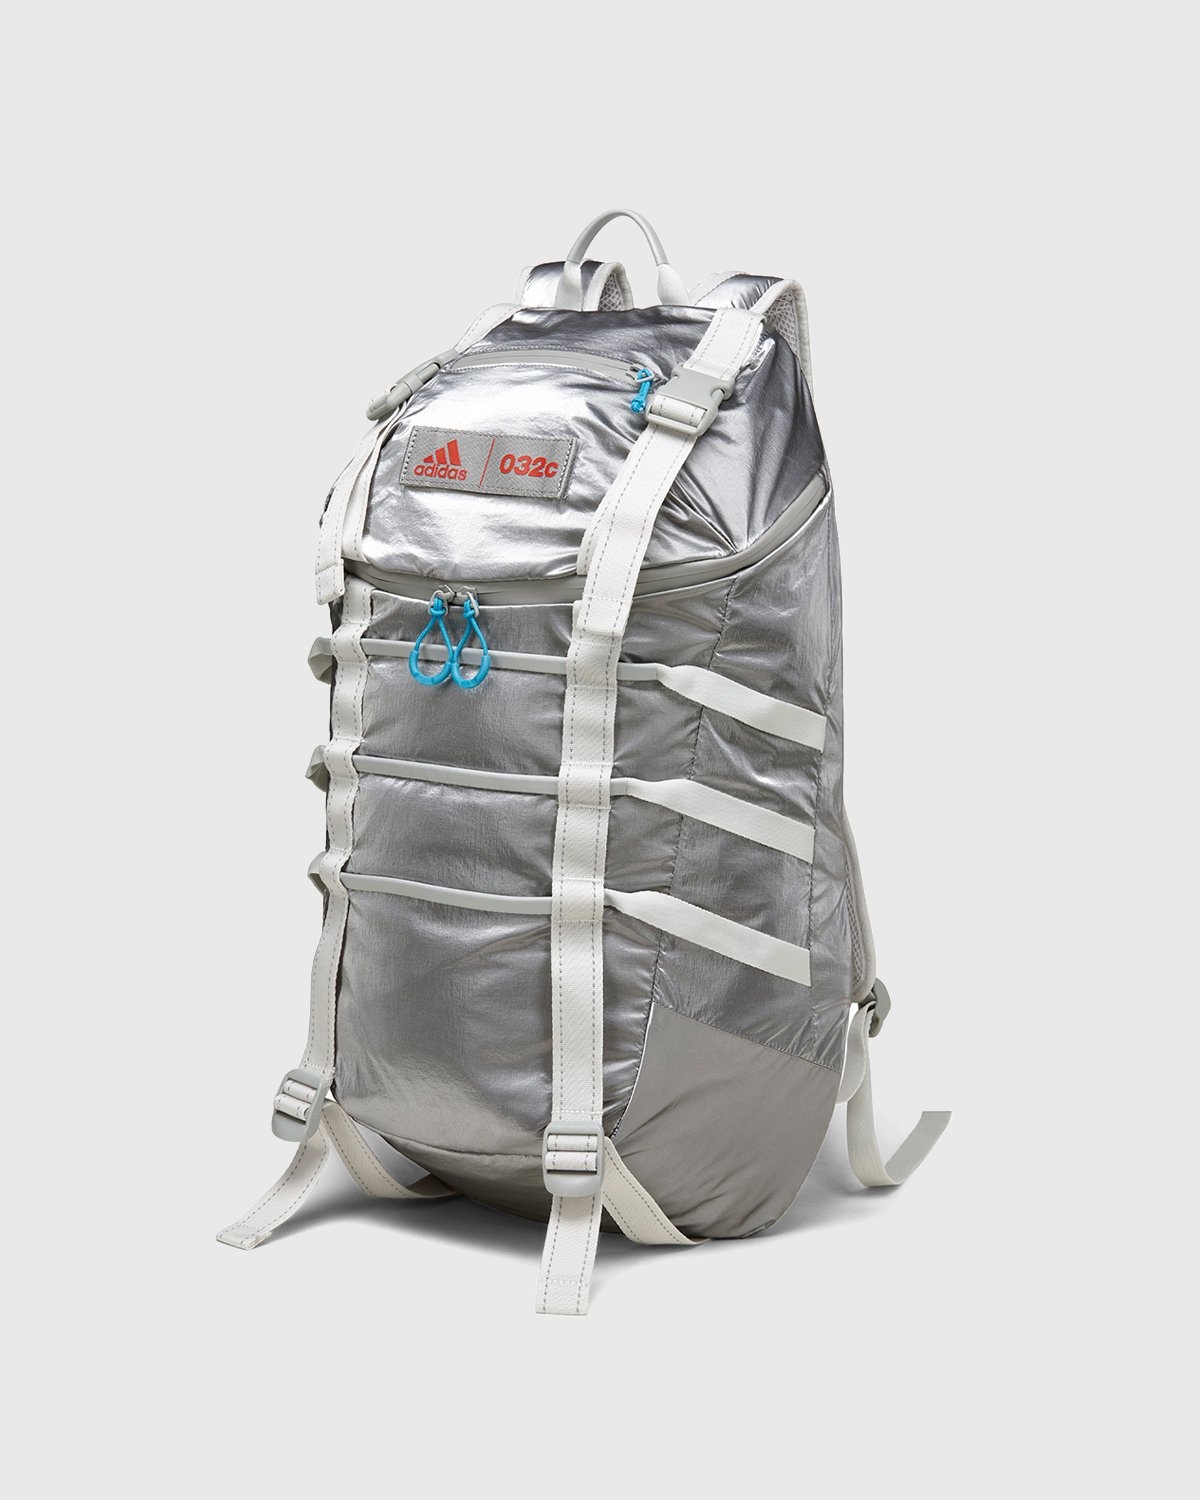 Adidas x 032c – Backpack Greone - Bags - White - Image 2